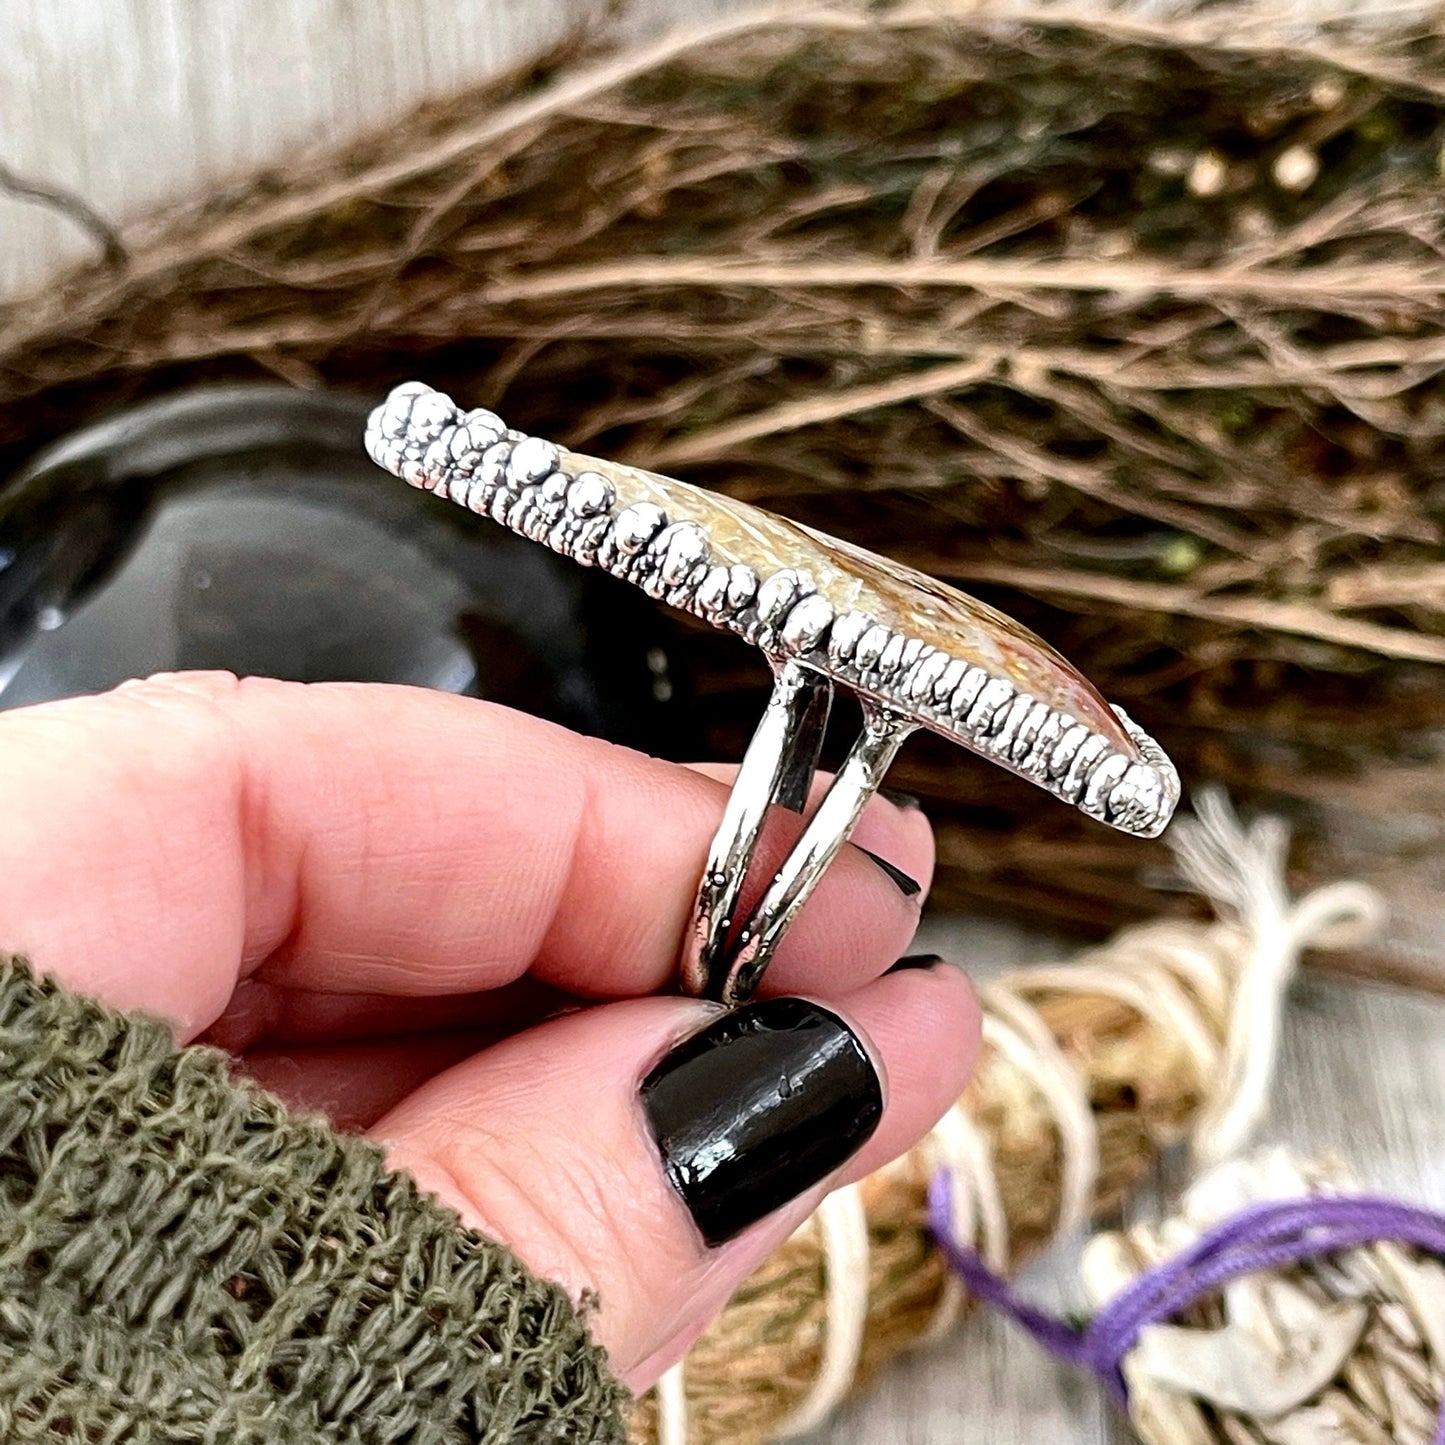 Big Bold Jewelry, Big Crystal Ring, Big Silver Ring, Big Stone Ring, Etsy ID: 1400297634, Fossilized Palm Root, FOXLARK- RINGS, Jewelry, Large Boho Ring, Large Crystal Ring, Large Stone Ring, Natural stone ring, Rings, silver crystal ring, Silver Stone Je